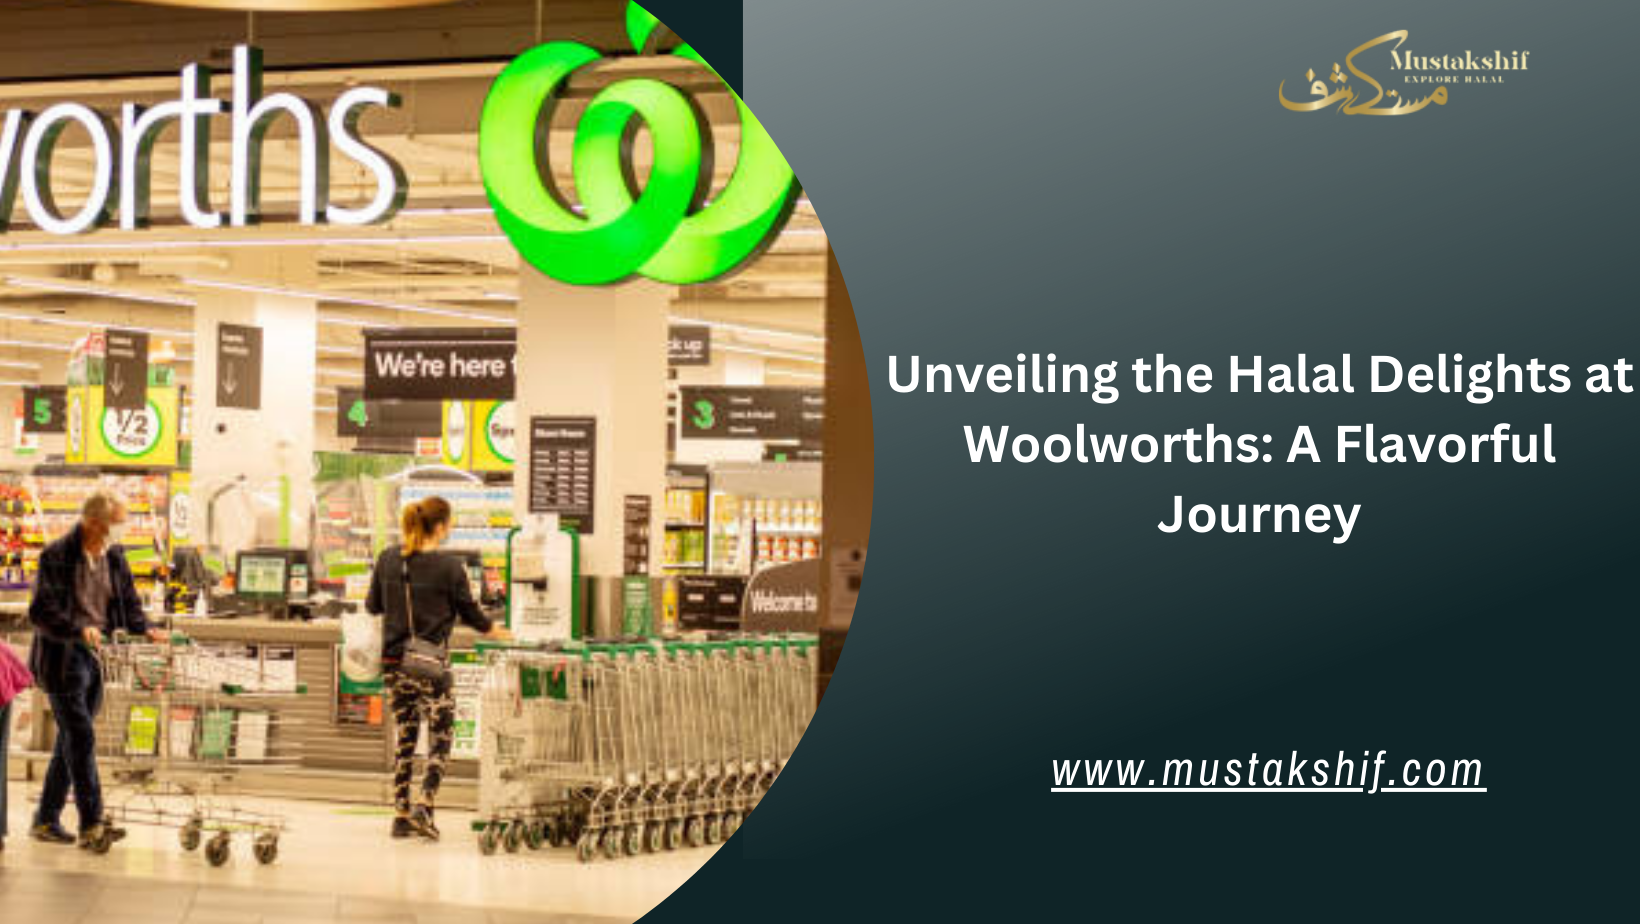 Unveiling the Halal Products at Woolworths: A Flavorful Journey